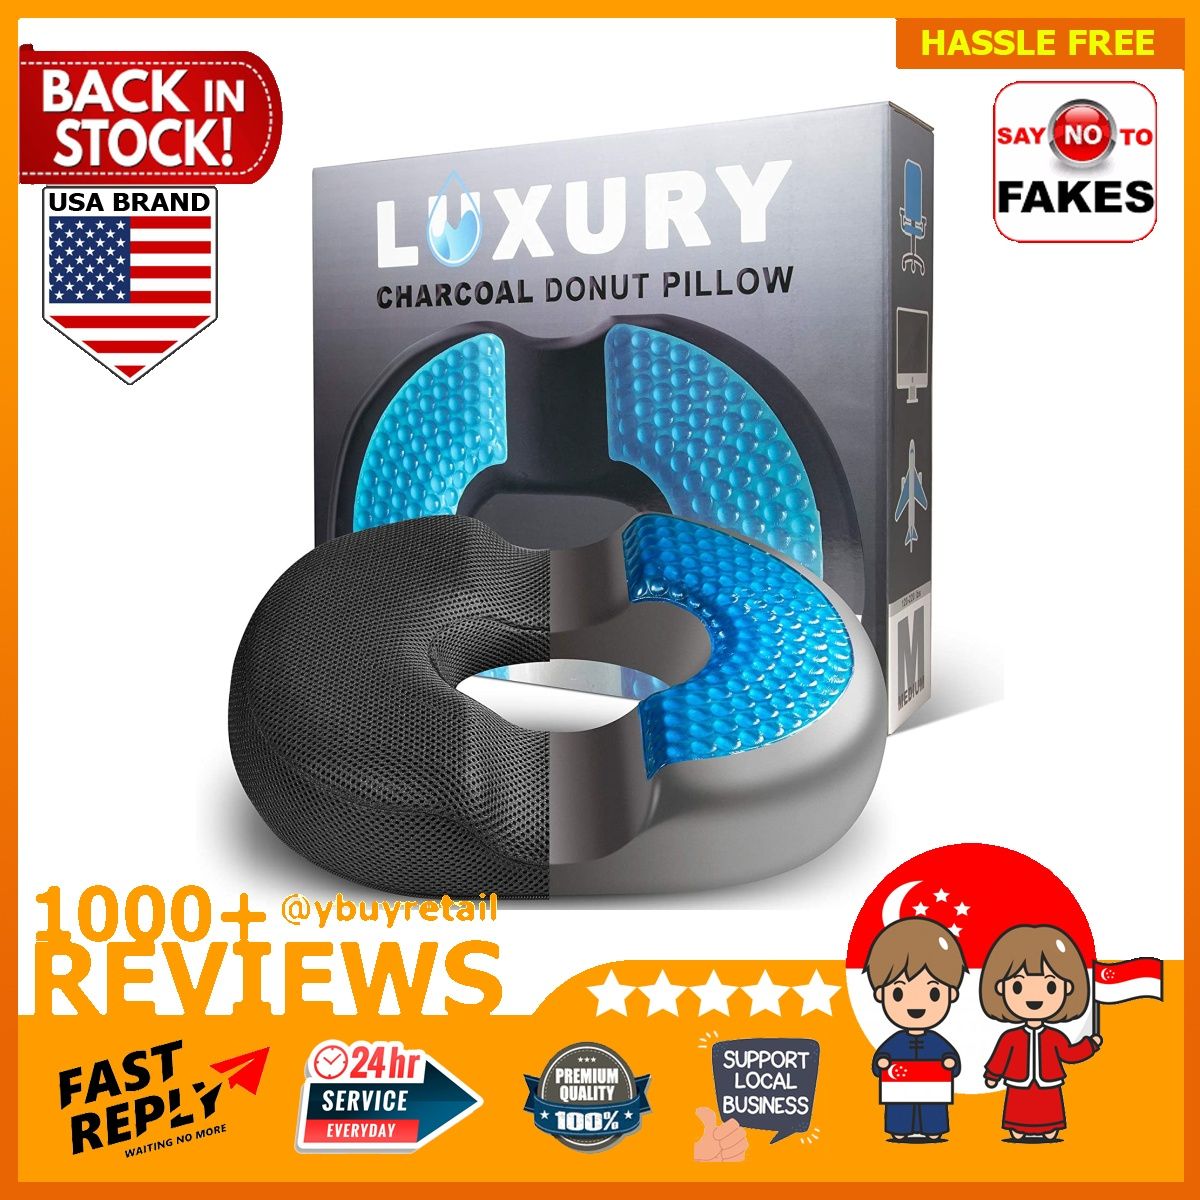 H. Luxury Donut Pillow for Tailbone Pain, Hemorrhoid Butt Cushion for  Postpartum Pregnancy Surgery, Charcoal Infused Memory Foam Doughnut Ring  Seat